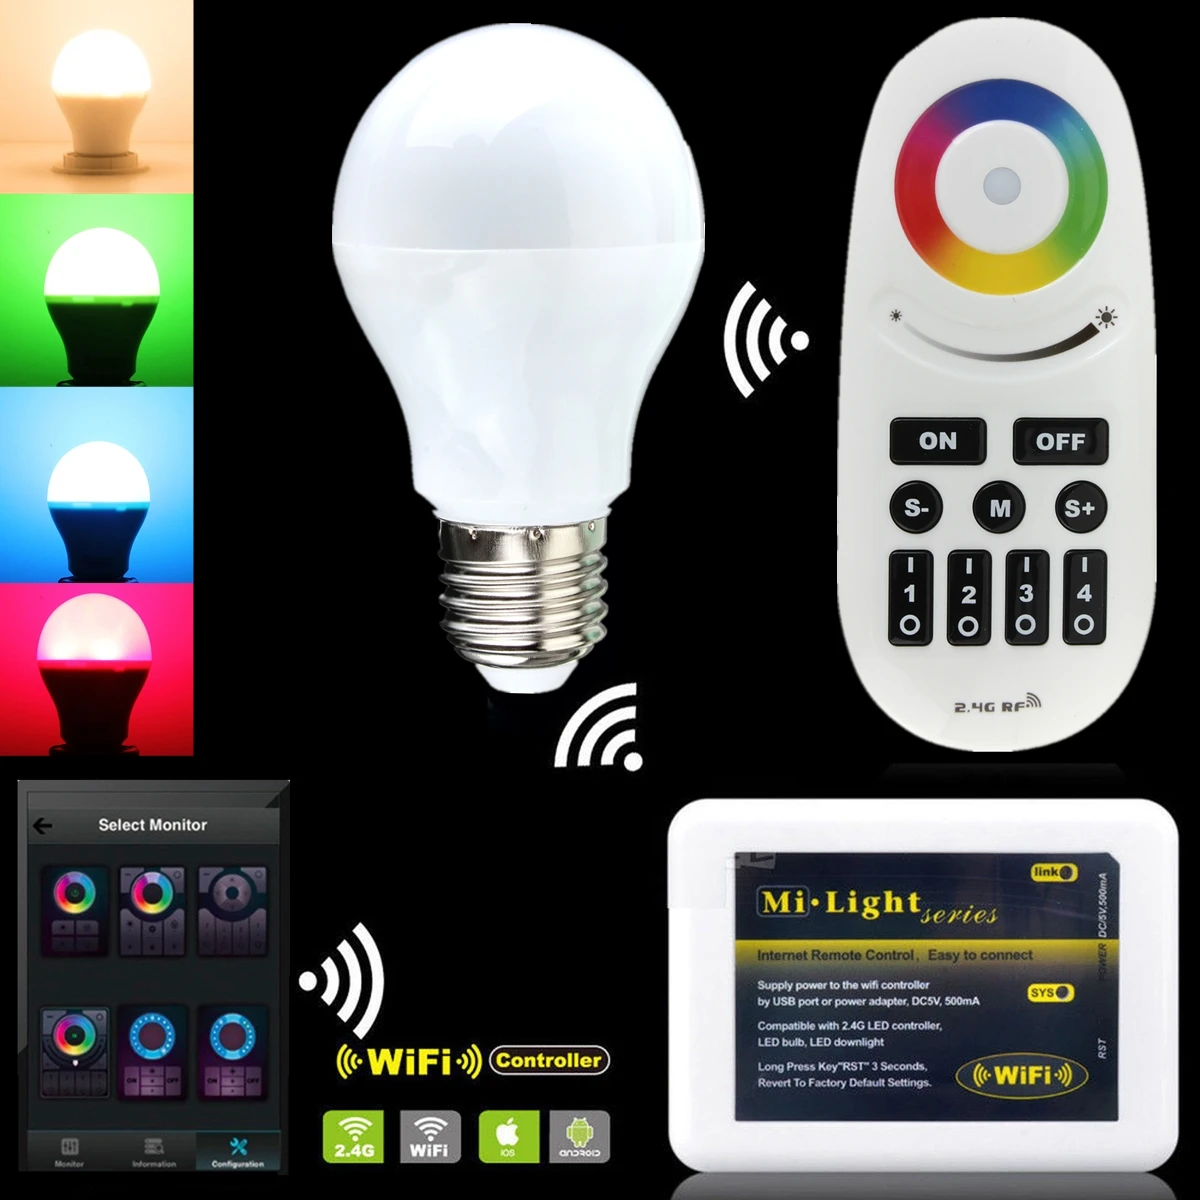 

Jiguoor RGBW OR RGB LED Controller 2.4G RF Touch Screen Remote Control 6A per Channel for RGB/Single led strip Light